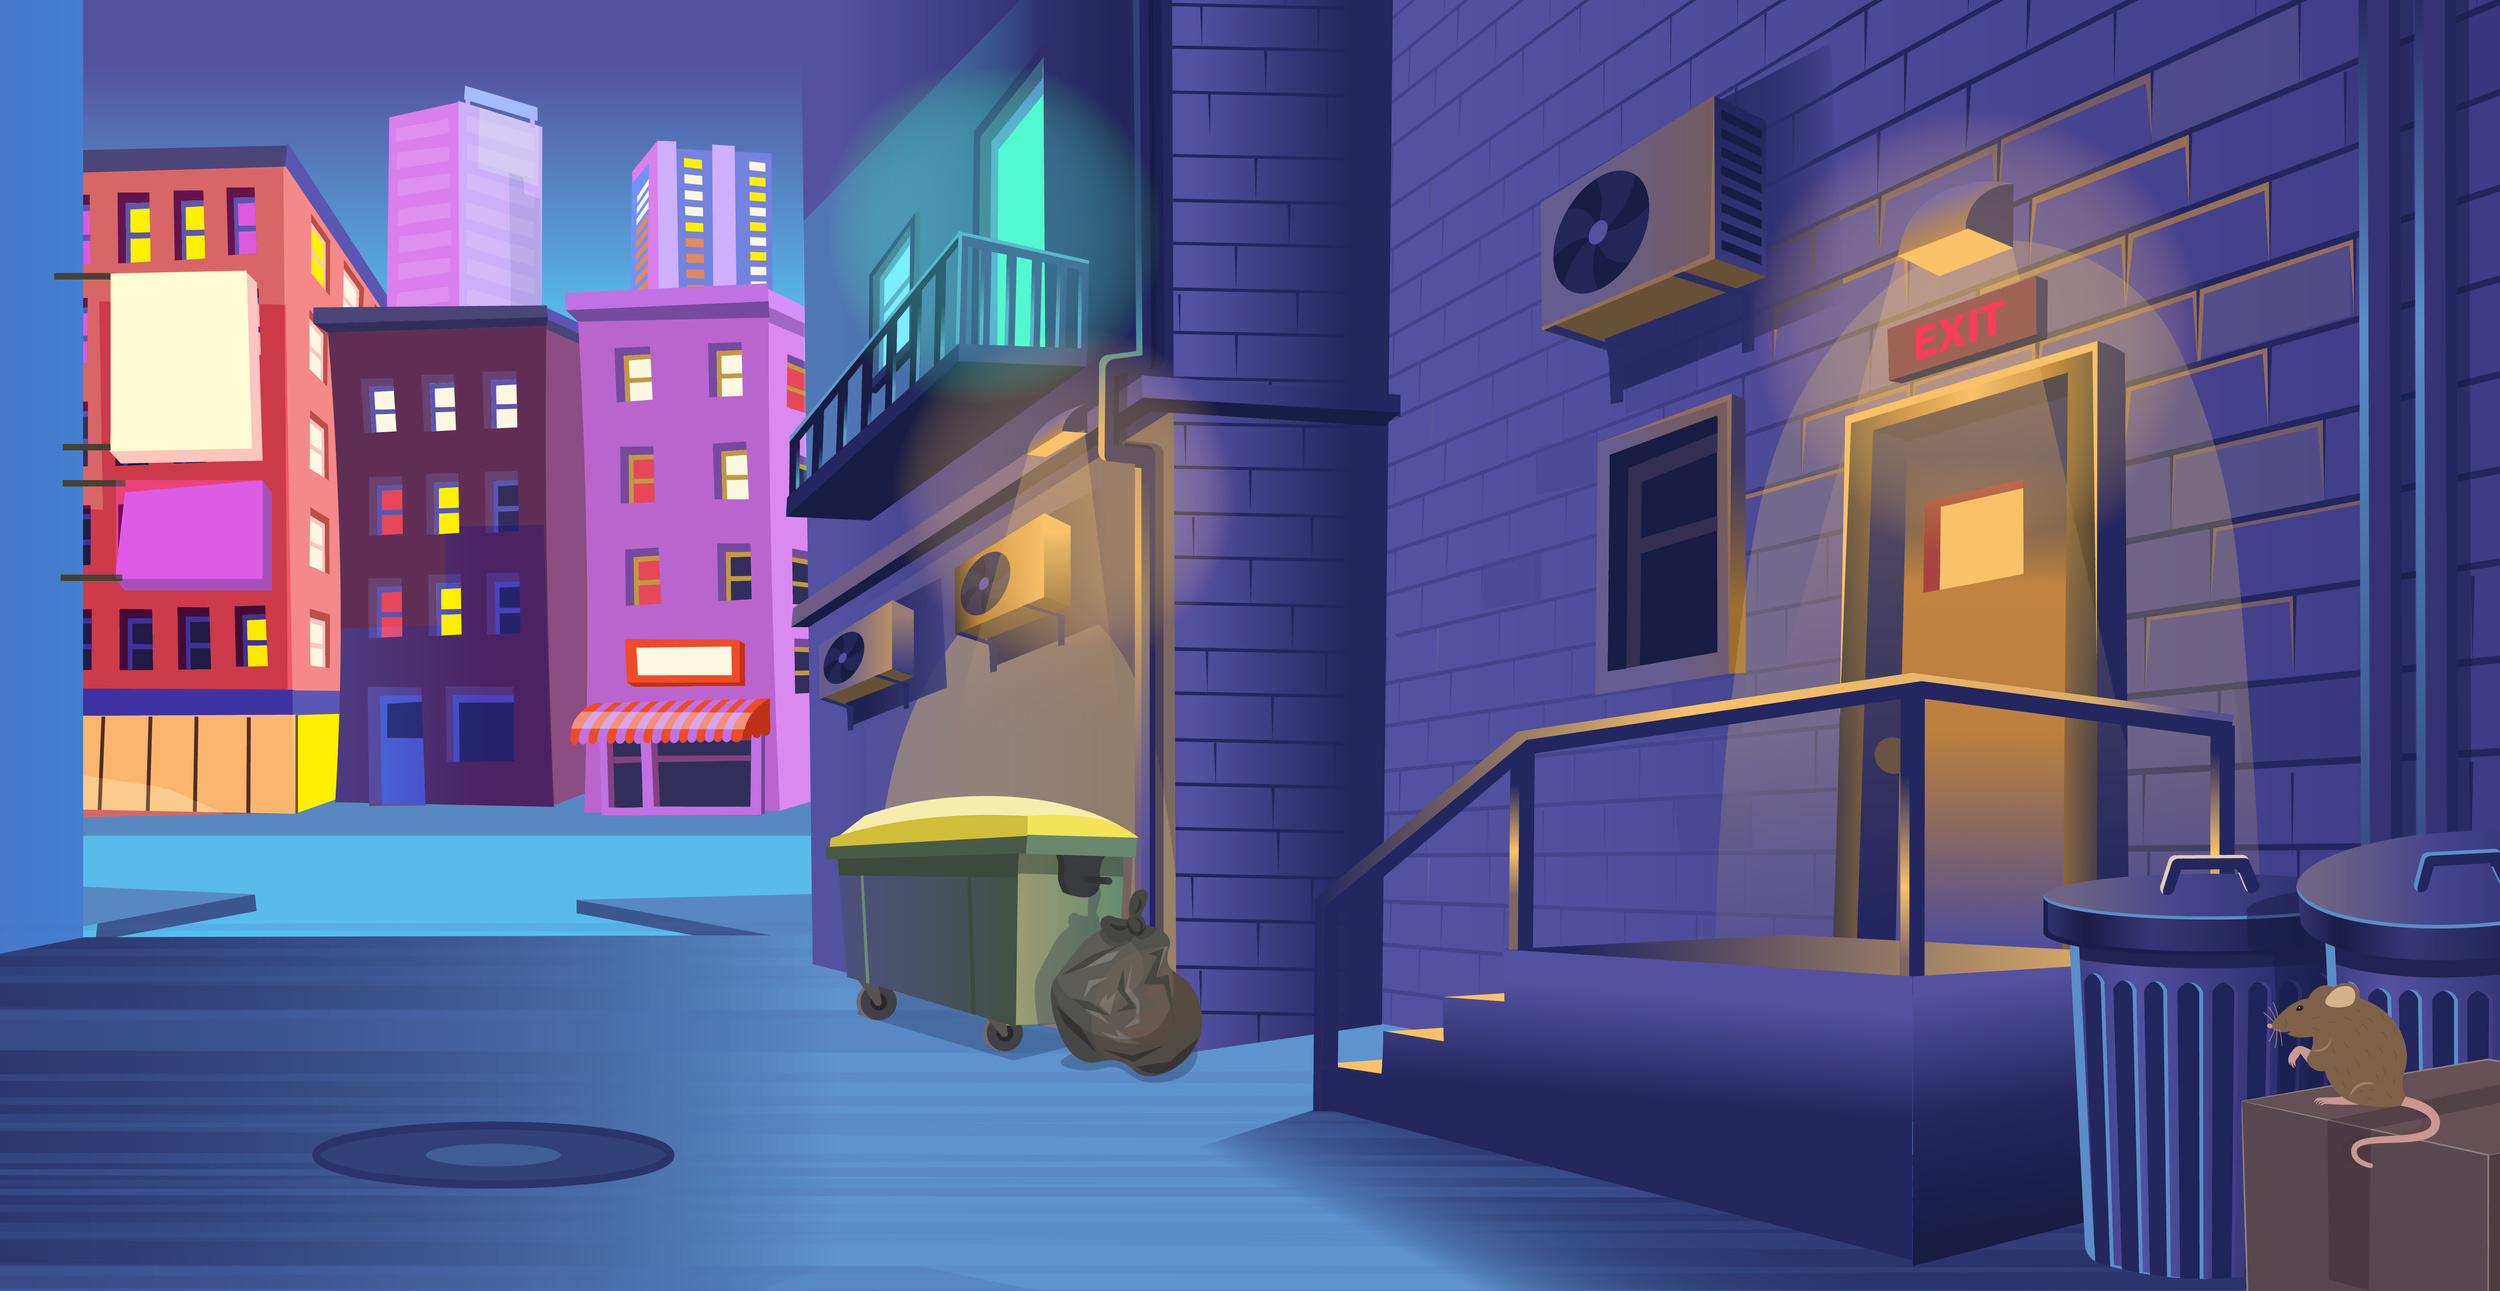 Dark back street alley with a door to a bar, a trash can, a car with an open trunk at night in cartoon style.